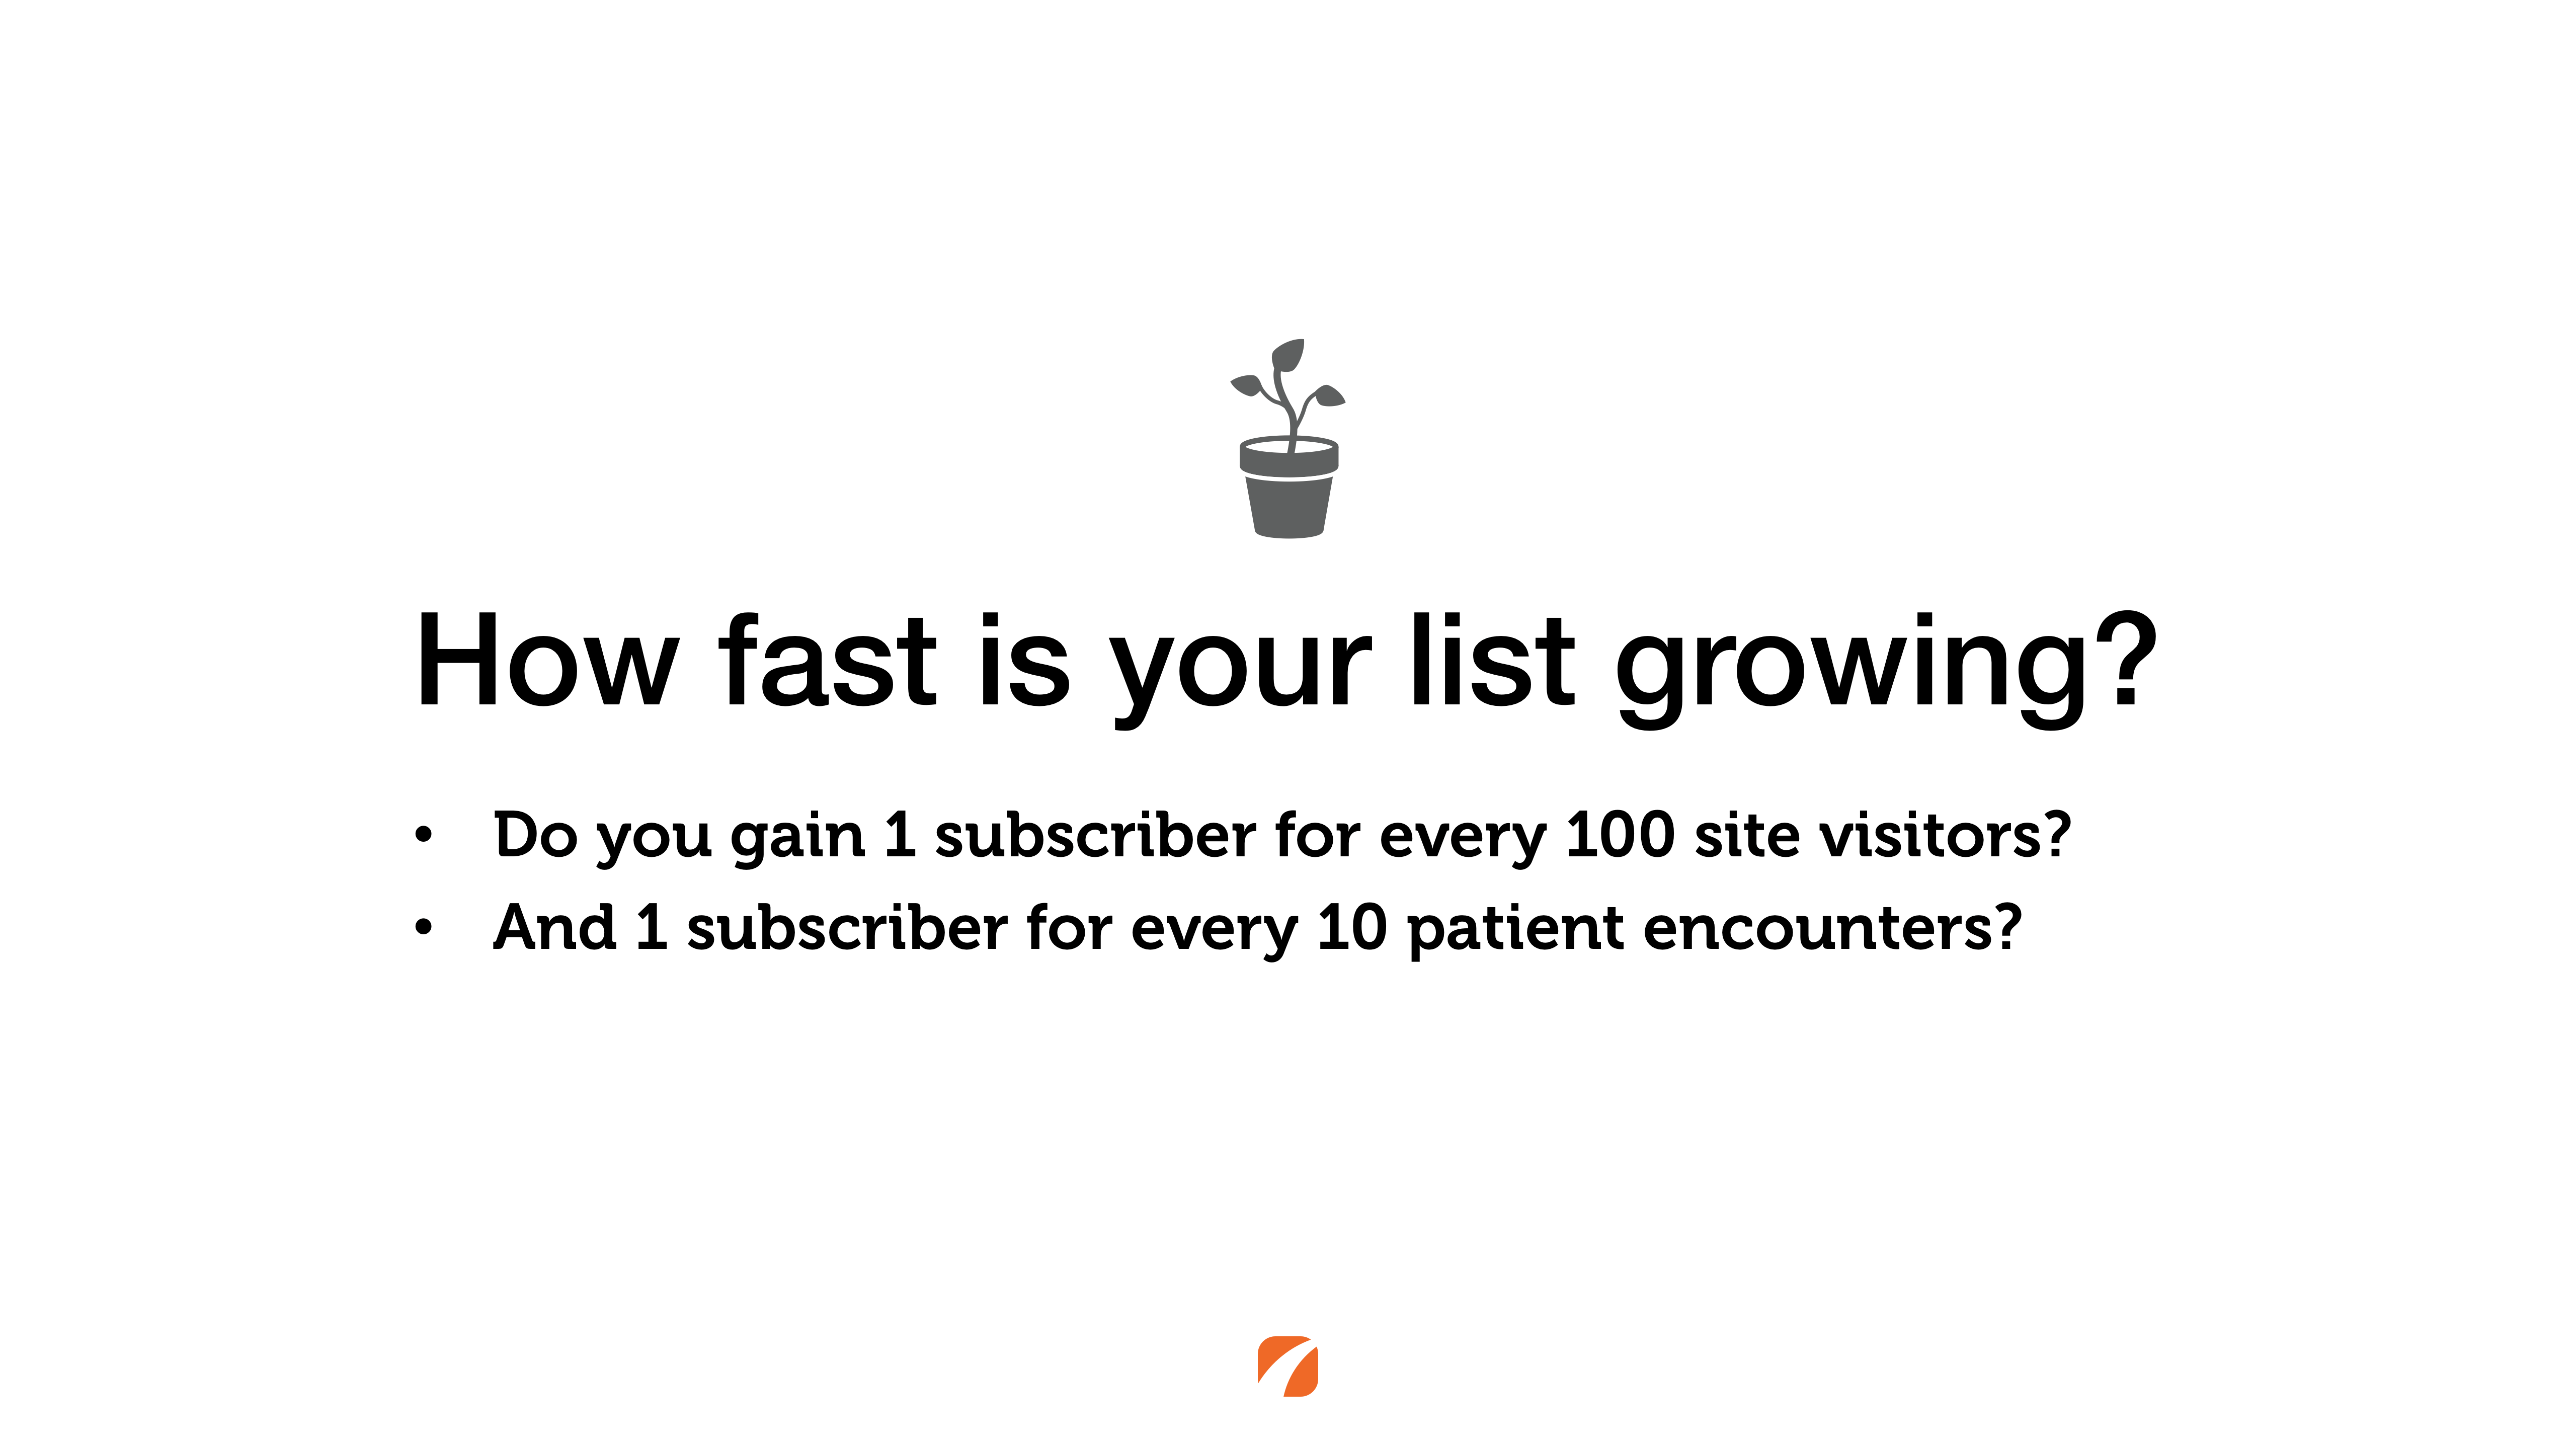 How fast is your email list growing? Do you gain 1 subscriber for every 100 site visitors and 1 subscriber for every 10 patient encounters?